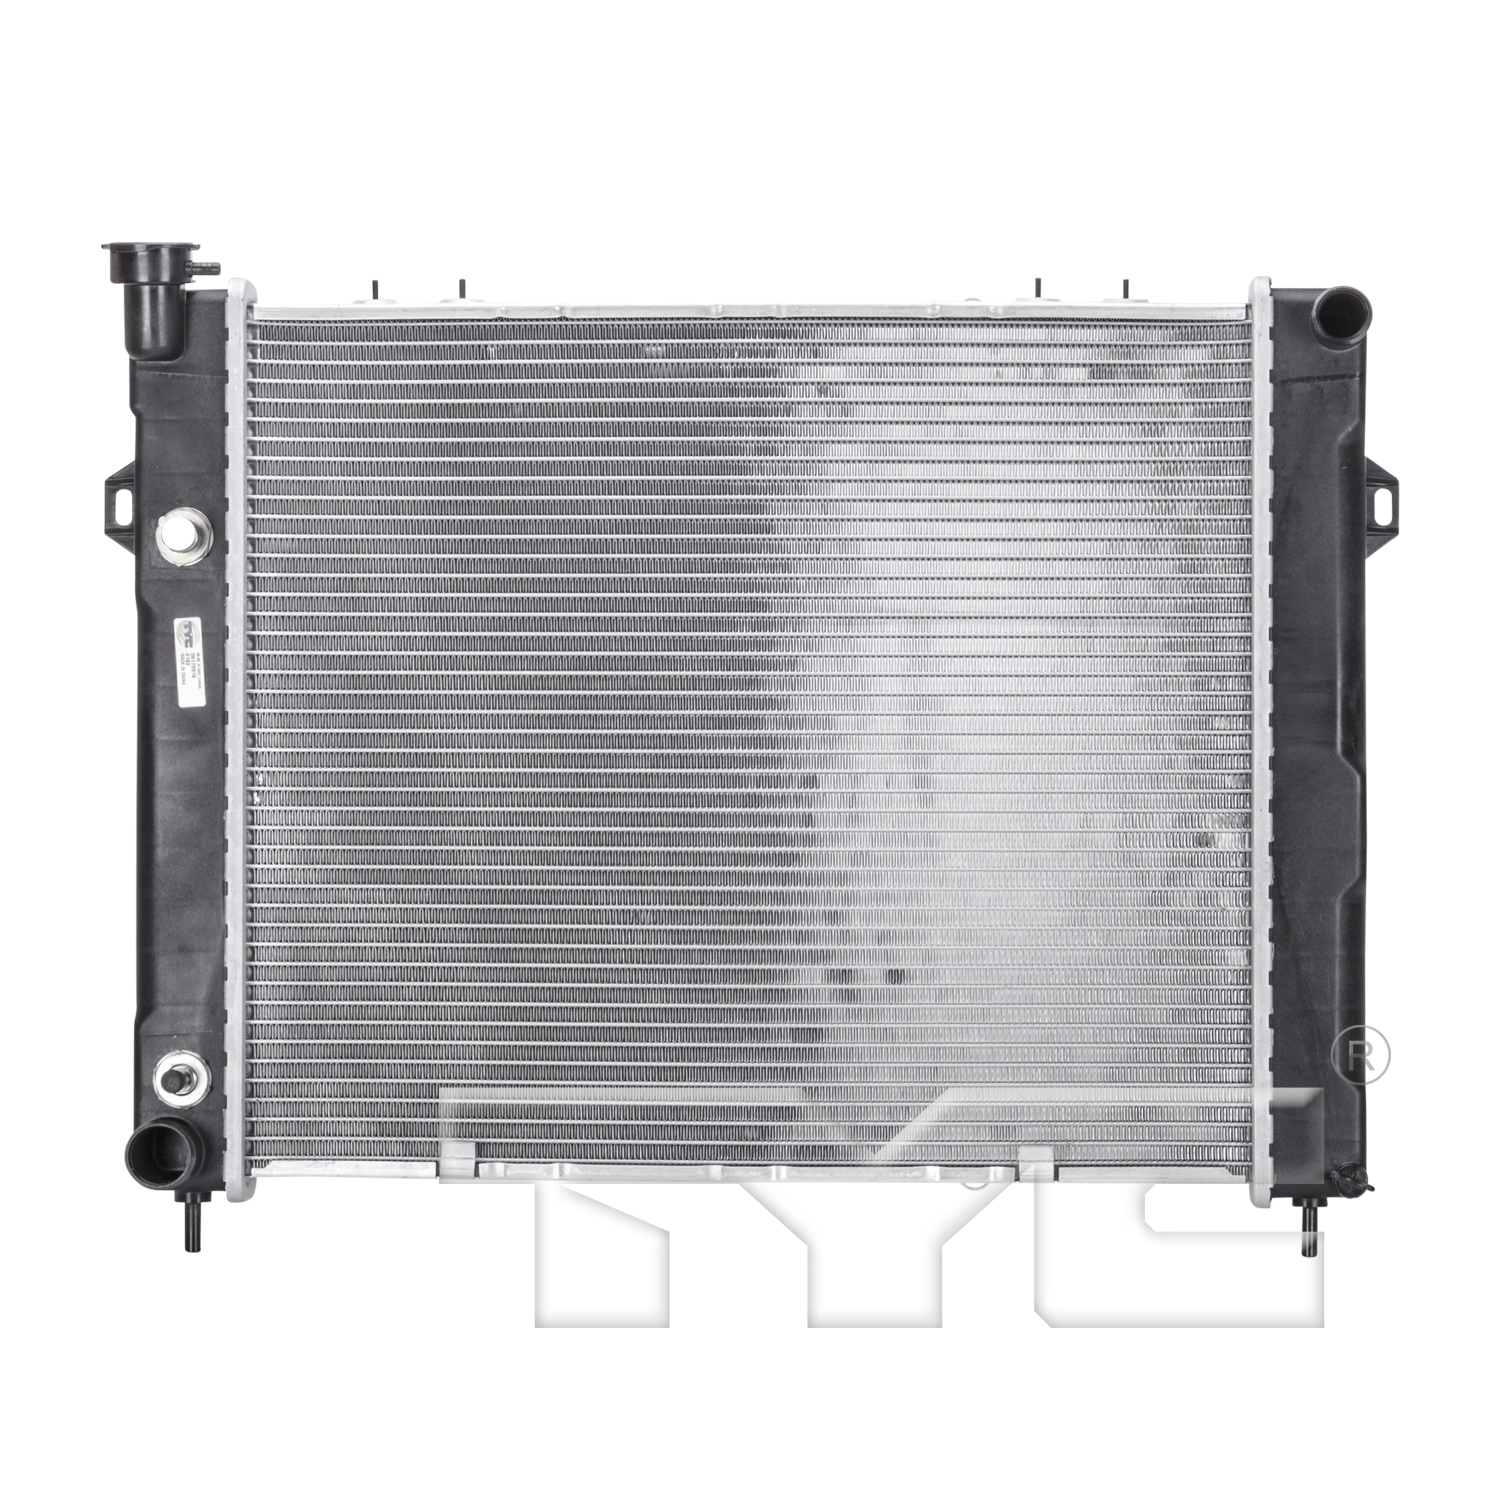 Aftermarket RADIATORS for JEEP - GRAND CHEROKEE, GRAND CHEROKEE,98-98,Radiator assembly